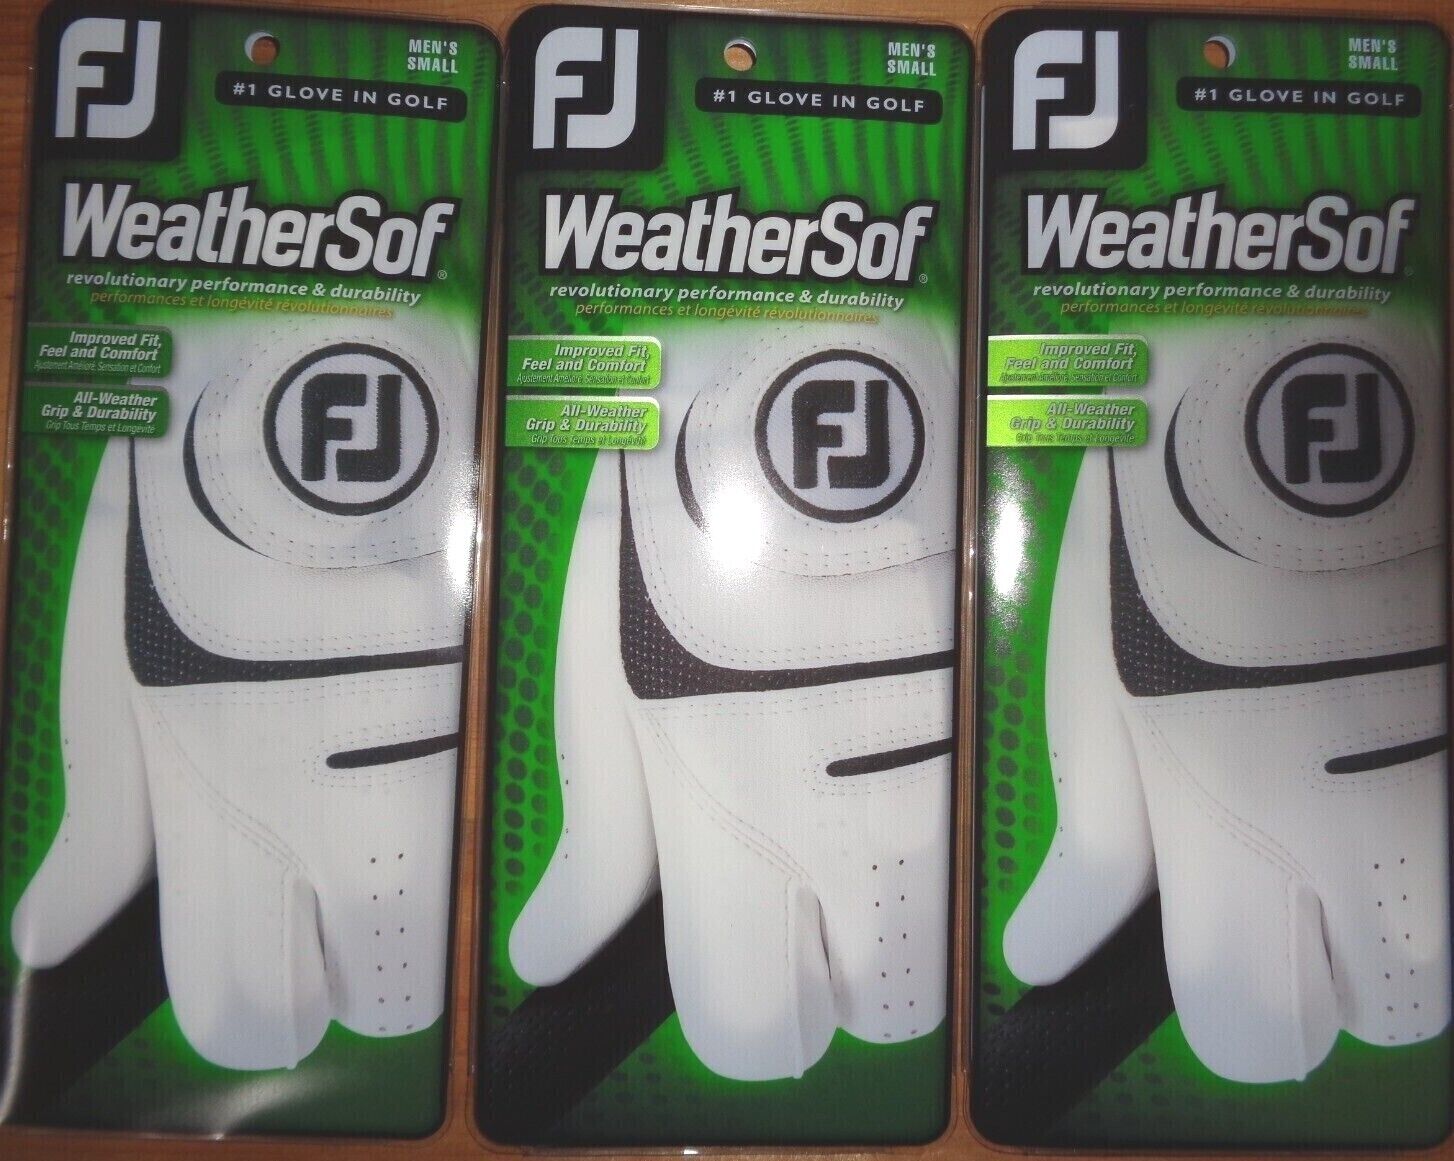 THREE (3) New FootJoy WEATHERSOF Golf Gloves, PICK A SIZE, LEFT or RIGHT